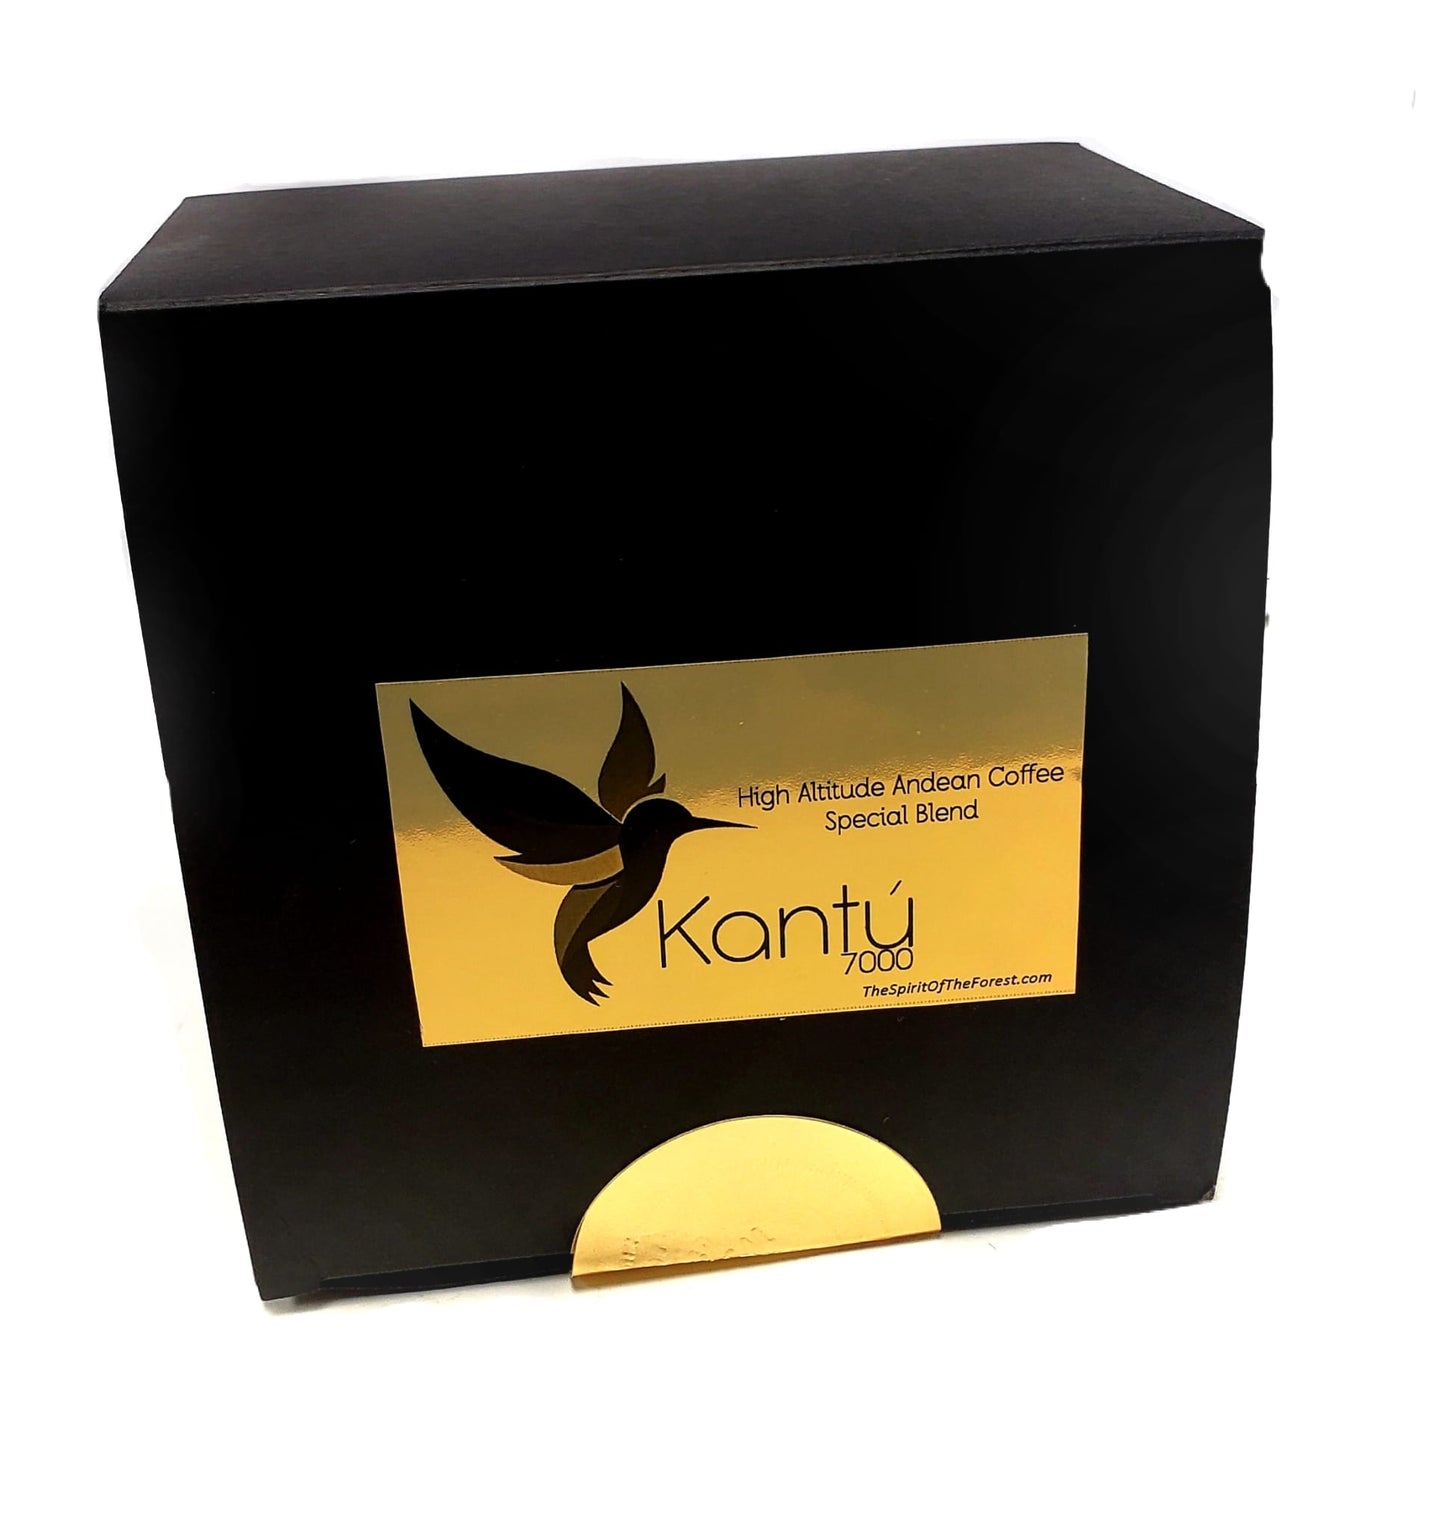 Kantu by The Spirit Of The Forest Coffee Roasted Whole Grown and roasted at 7.000 High Altitude Bean Premium Blend Washed Pisque Ecuador by Arnaud Causse Ecuadorian 4 Variety blended